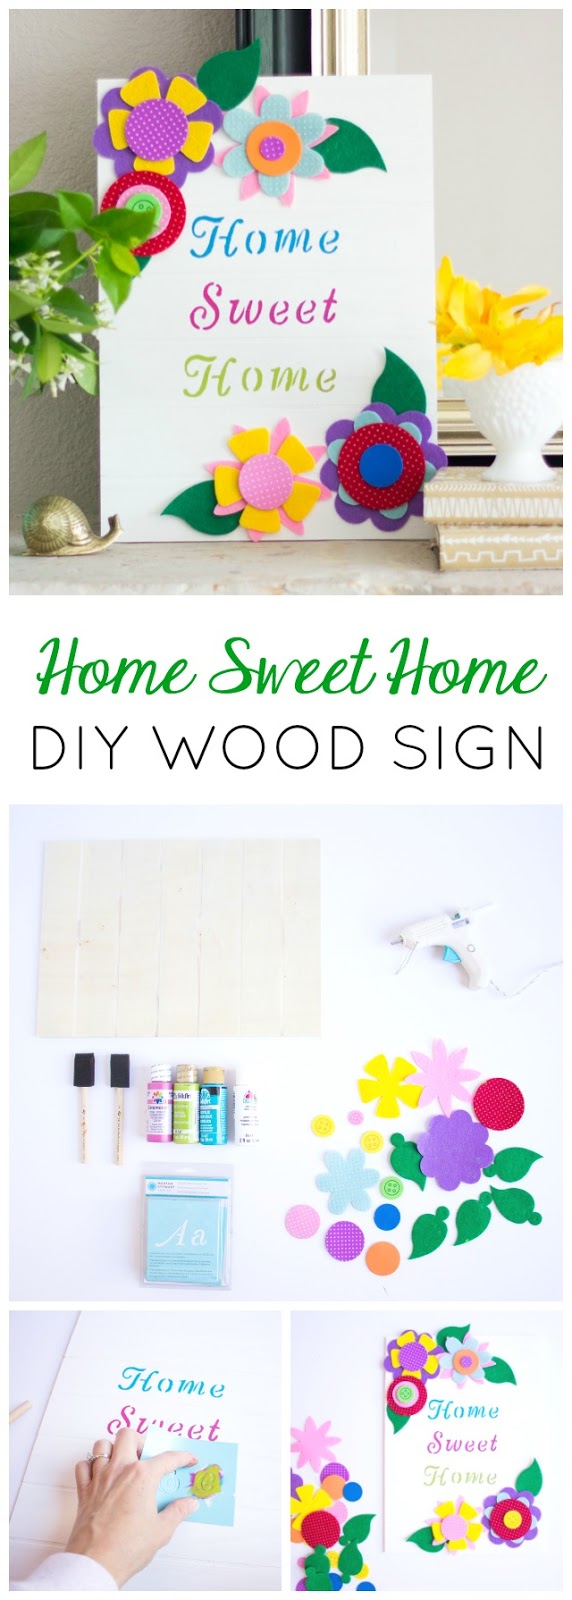 Make this pretty floral wood Home Sweet Home sign for easy DIY decor!